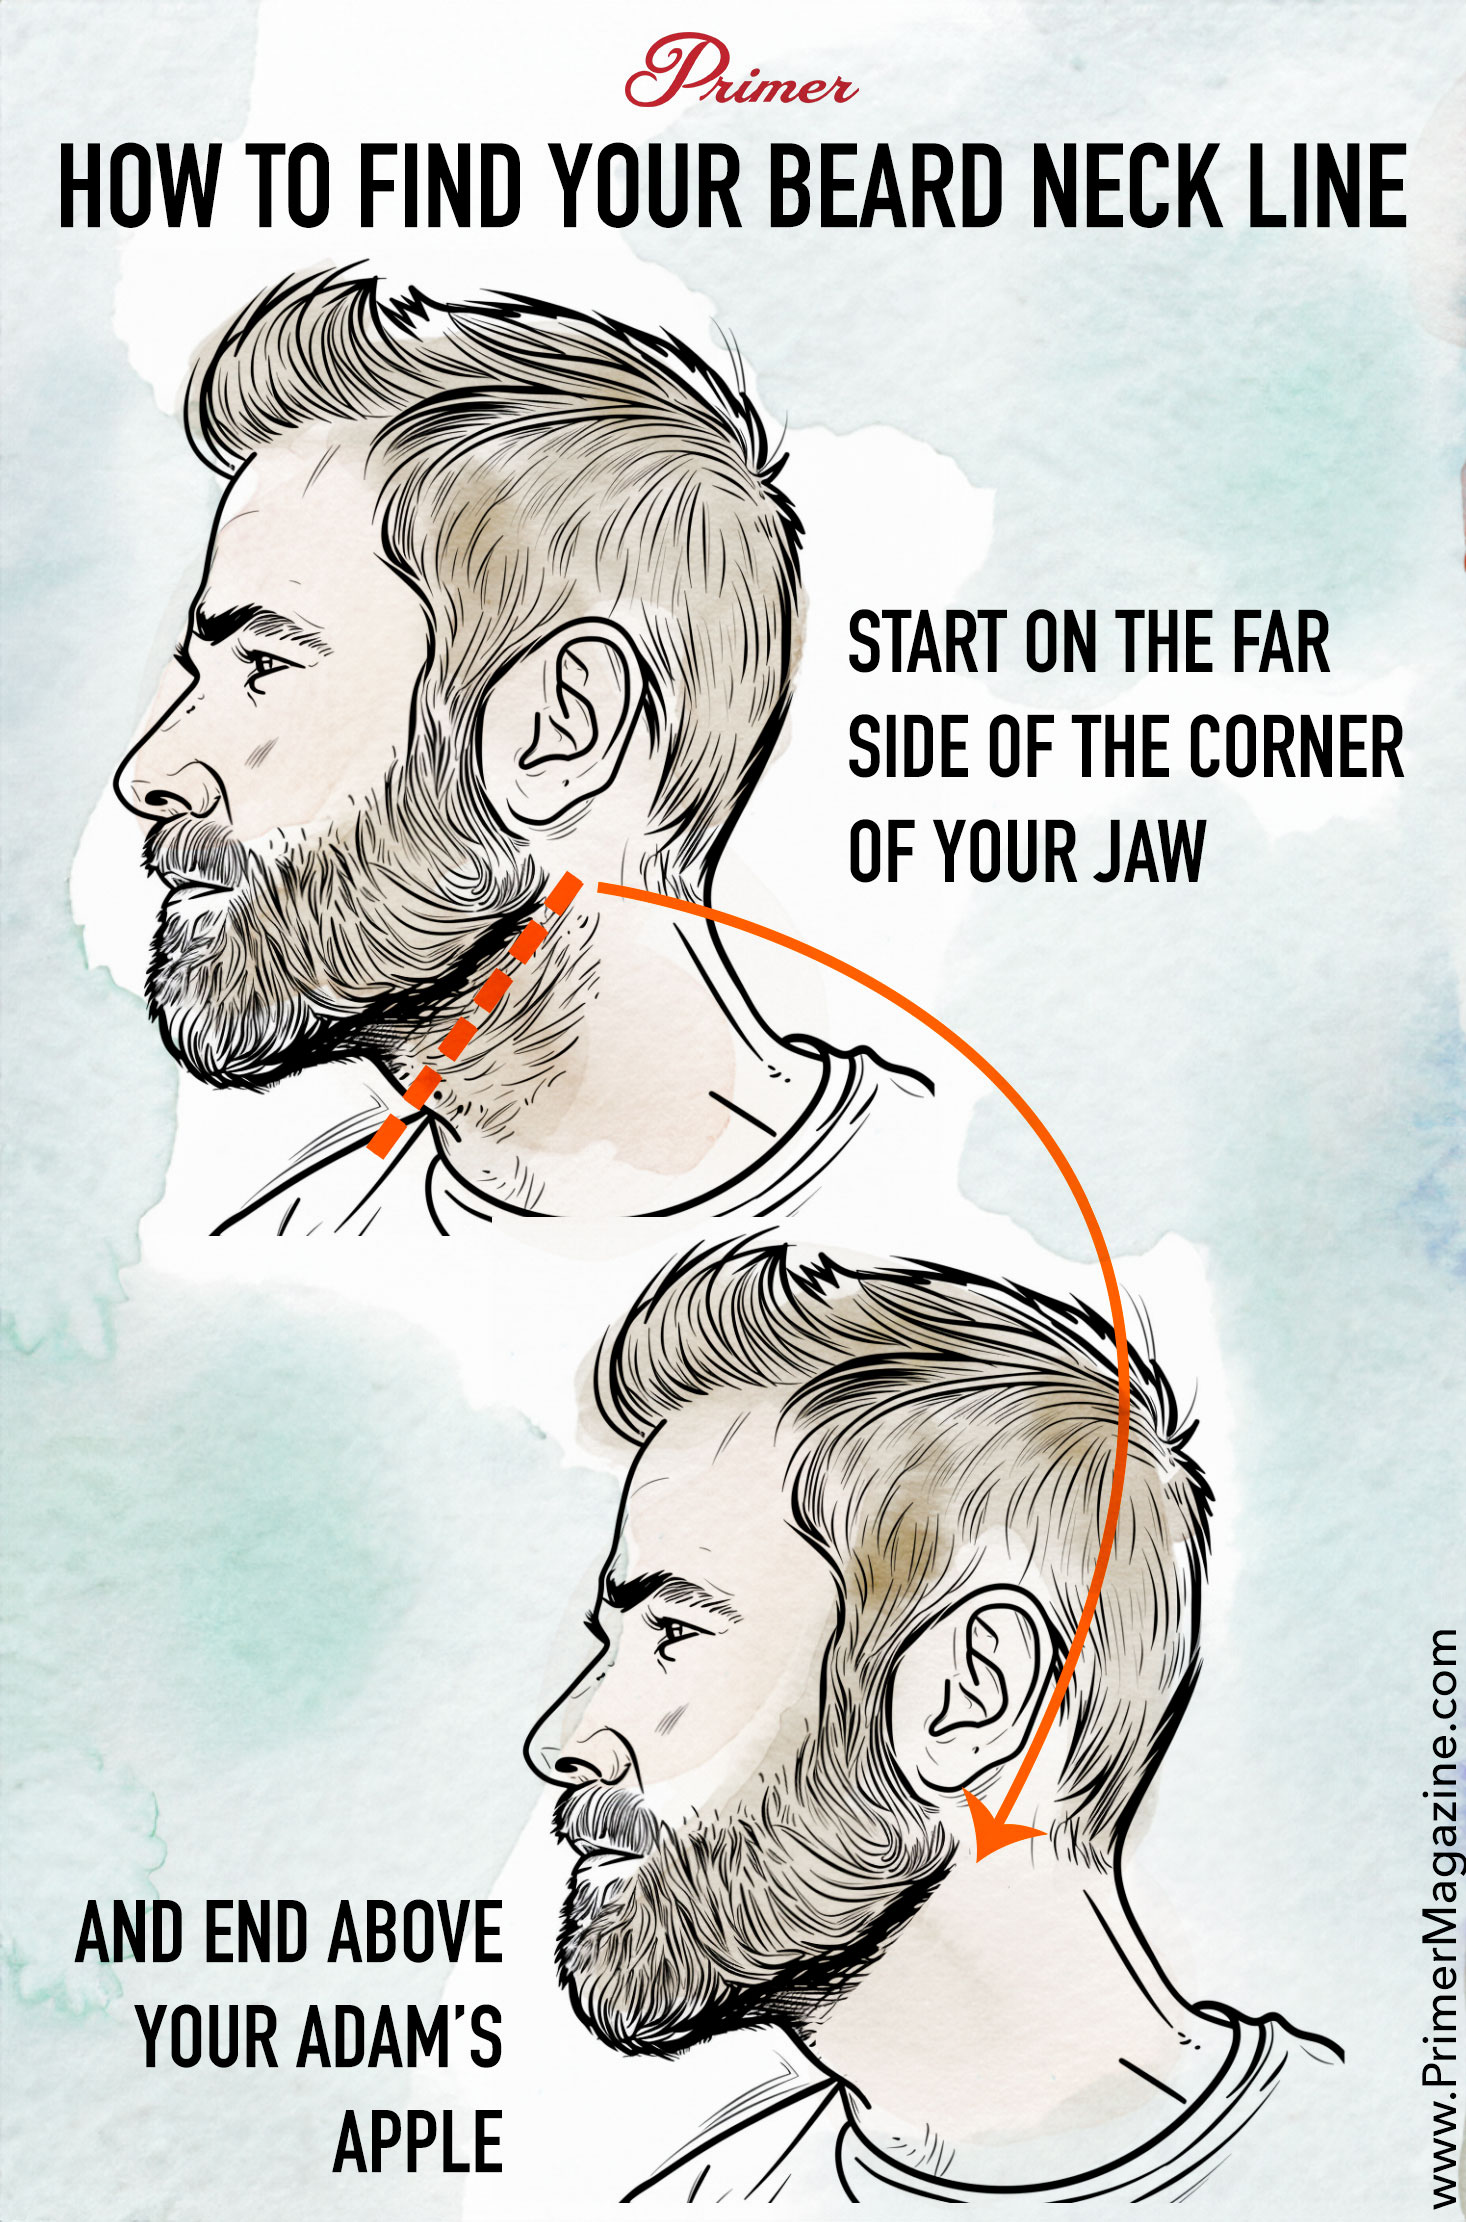 Illustrated guide on how to find the appropriate neckline for a beard. Two side profile drawings of a man with a beard are featured. The top image shows a dotted line marking the start of the neckline on the far side of the jaw corner. The bottom image shows an orange line curving from the start point around the neck to end above the Adam's apple. Text instructions accompany each step. The background is a watercolor wash in blue and white. The logo of 'Primer' is at the top